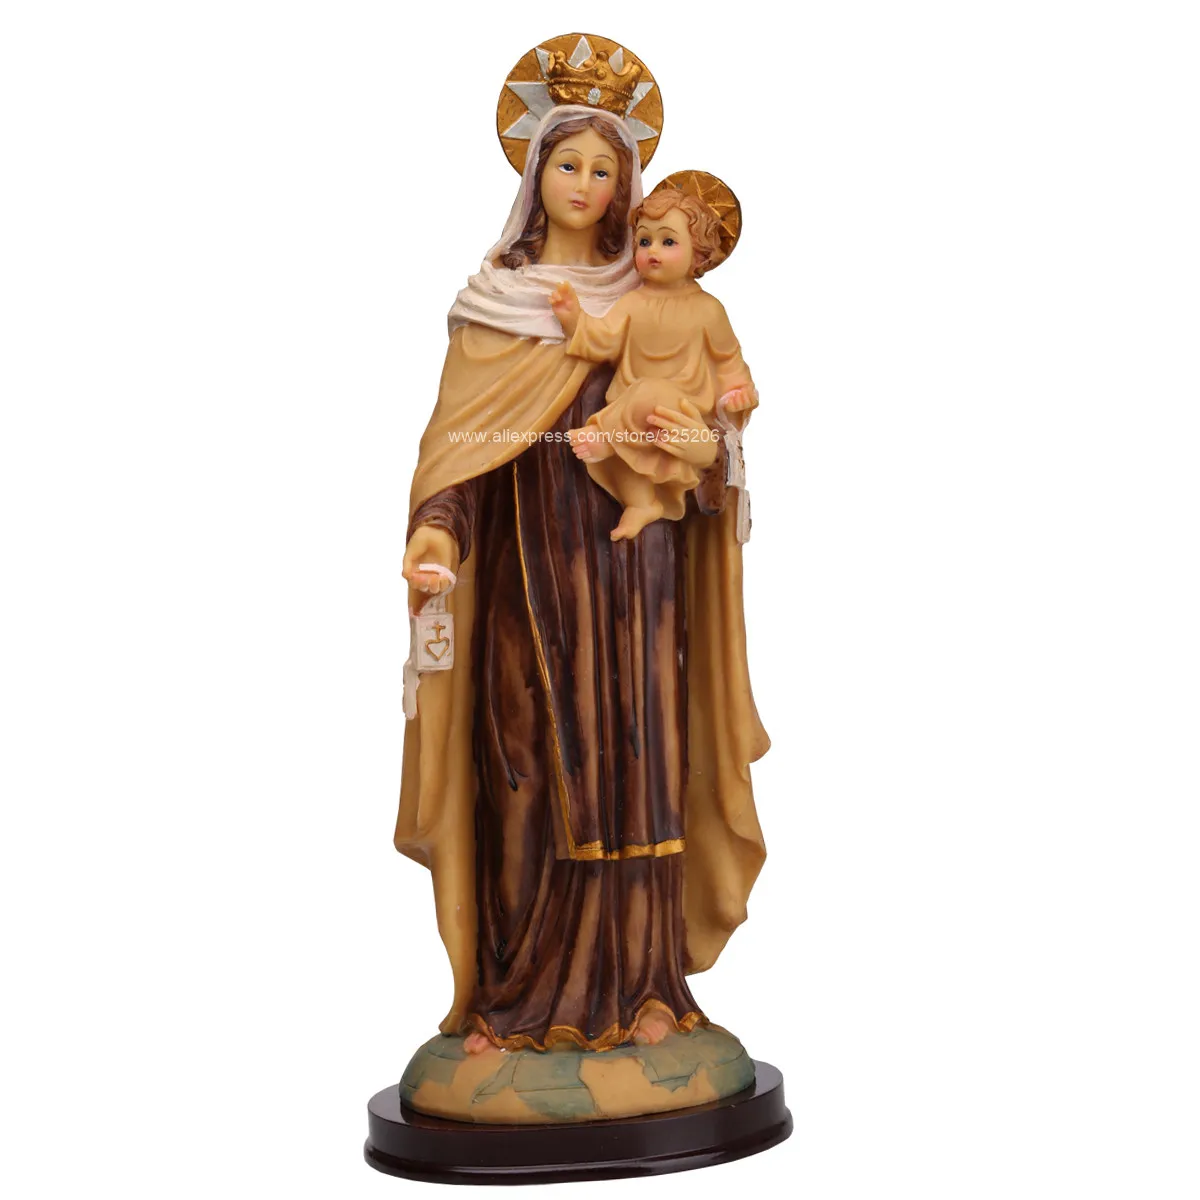 Our Lady of Mount Carmel Virgin Mary & Child Statue Sculpture Holy Figurine for Home Catholic Decorative Ornament 32cm 12.6inch